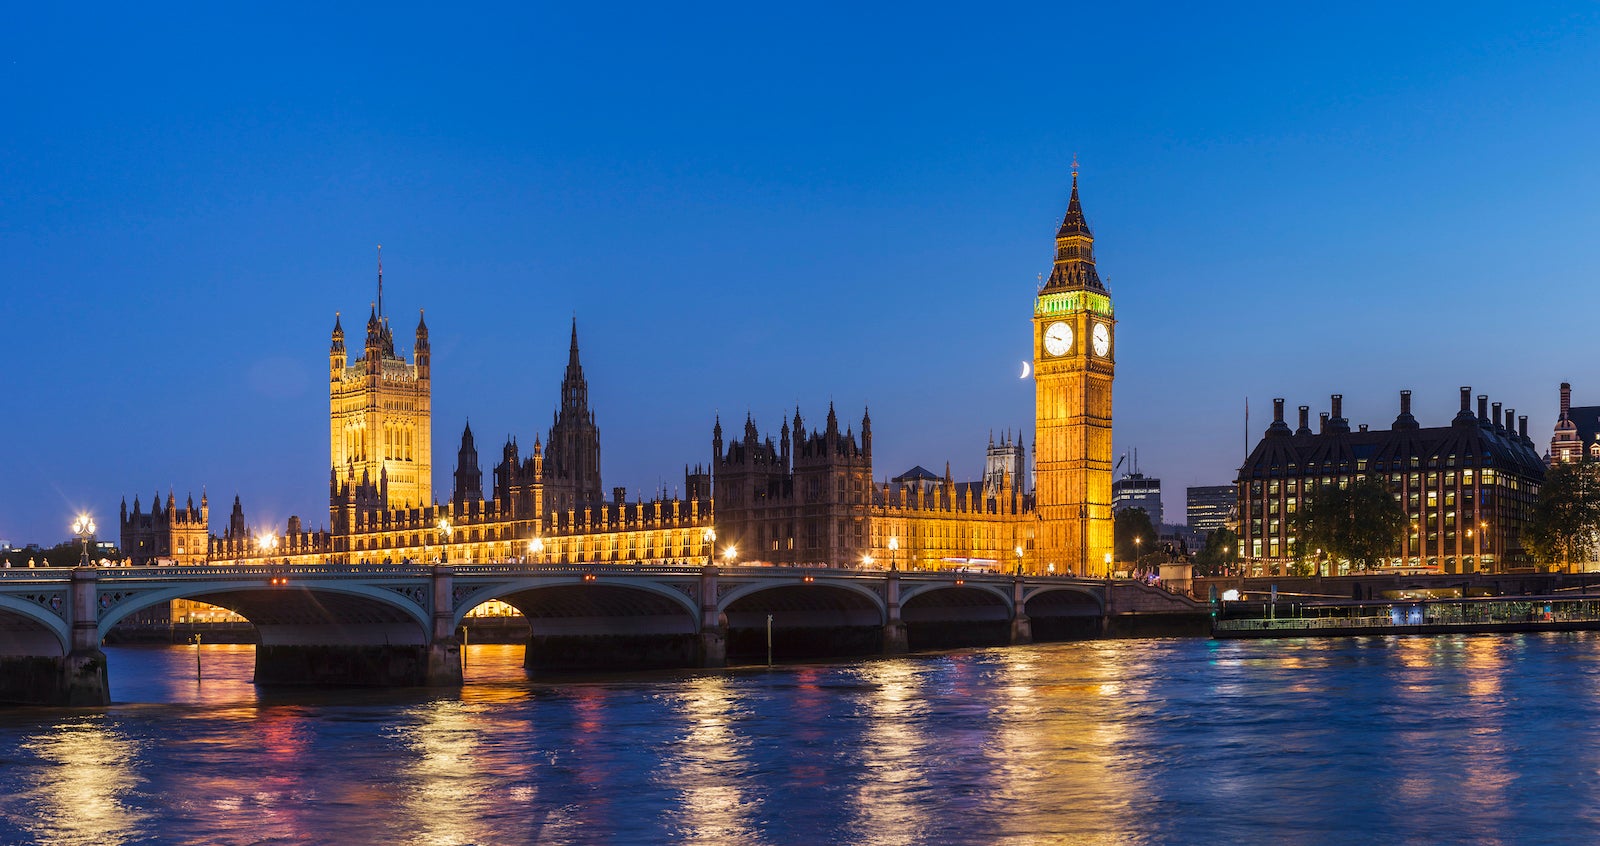 You are currently viewing Round-trip flights to London from US as low as $346